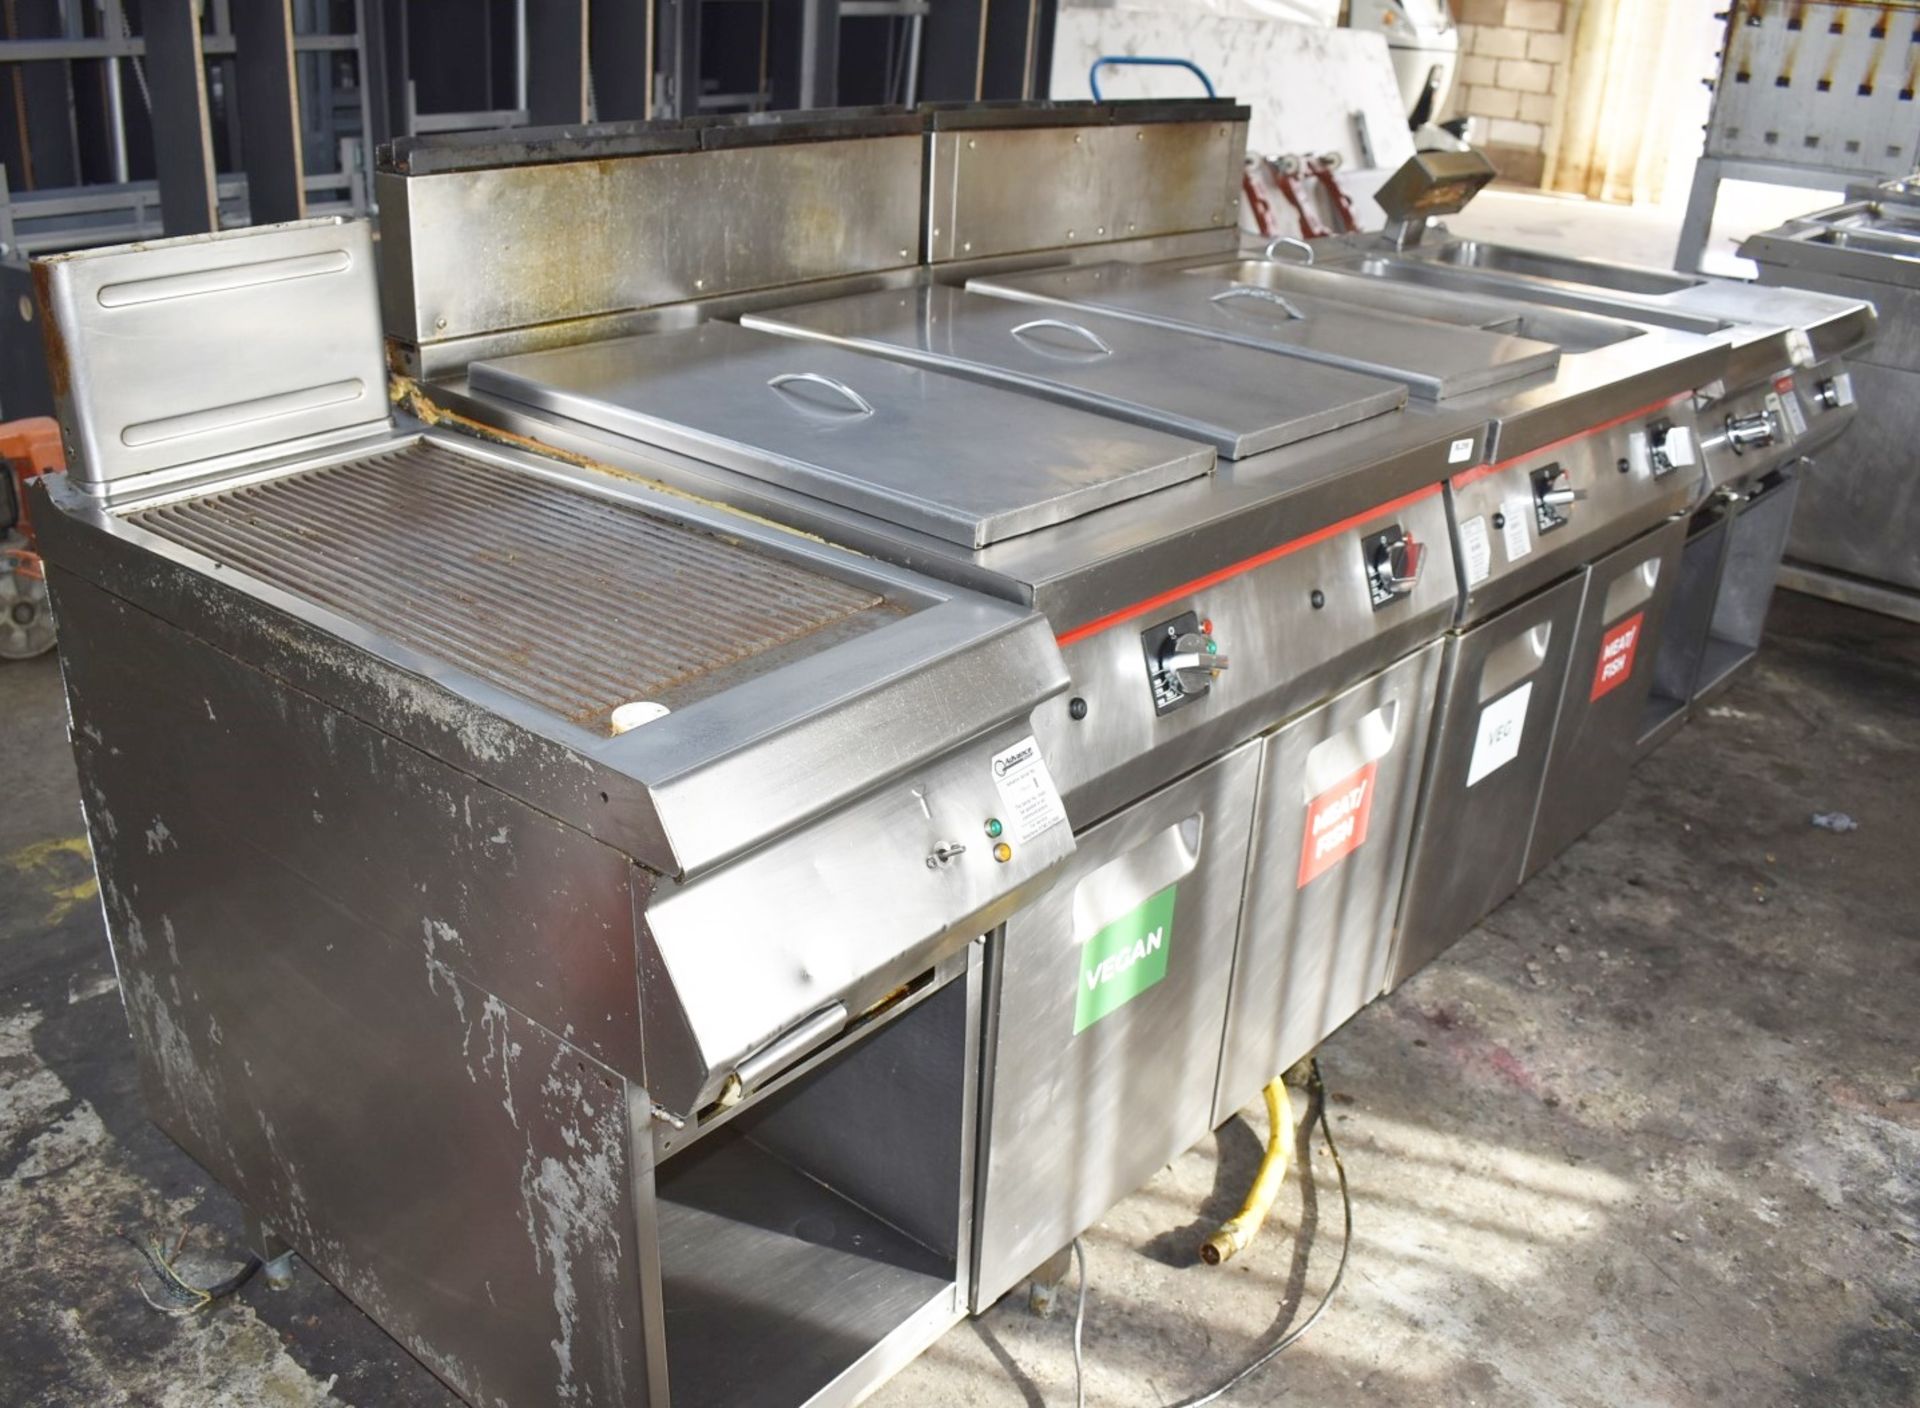 1 x Angelo Po Cookstation - Includes 10 Appliances Including Fryers, Griddles, Chip Warmers, Pasta - Image 30 of 37